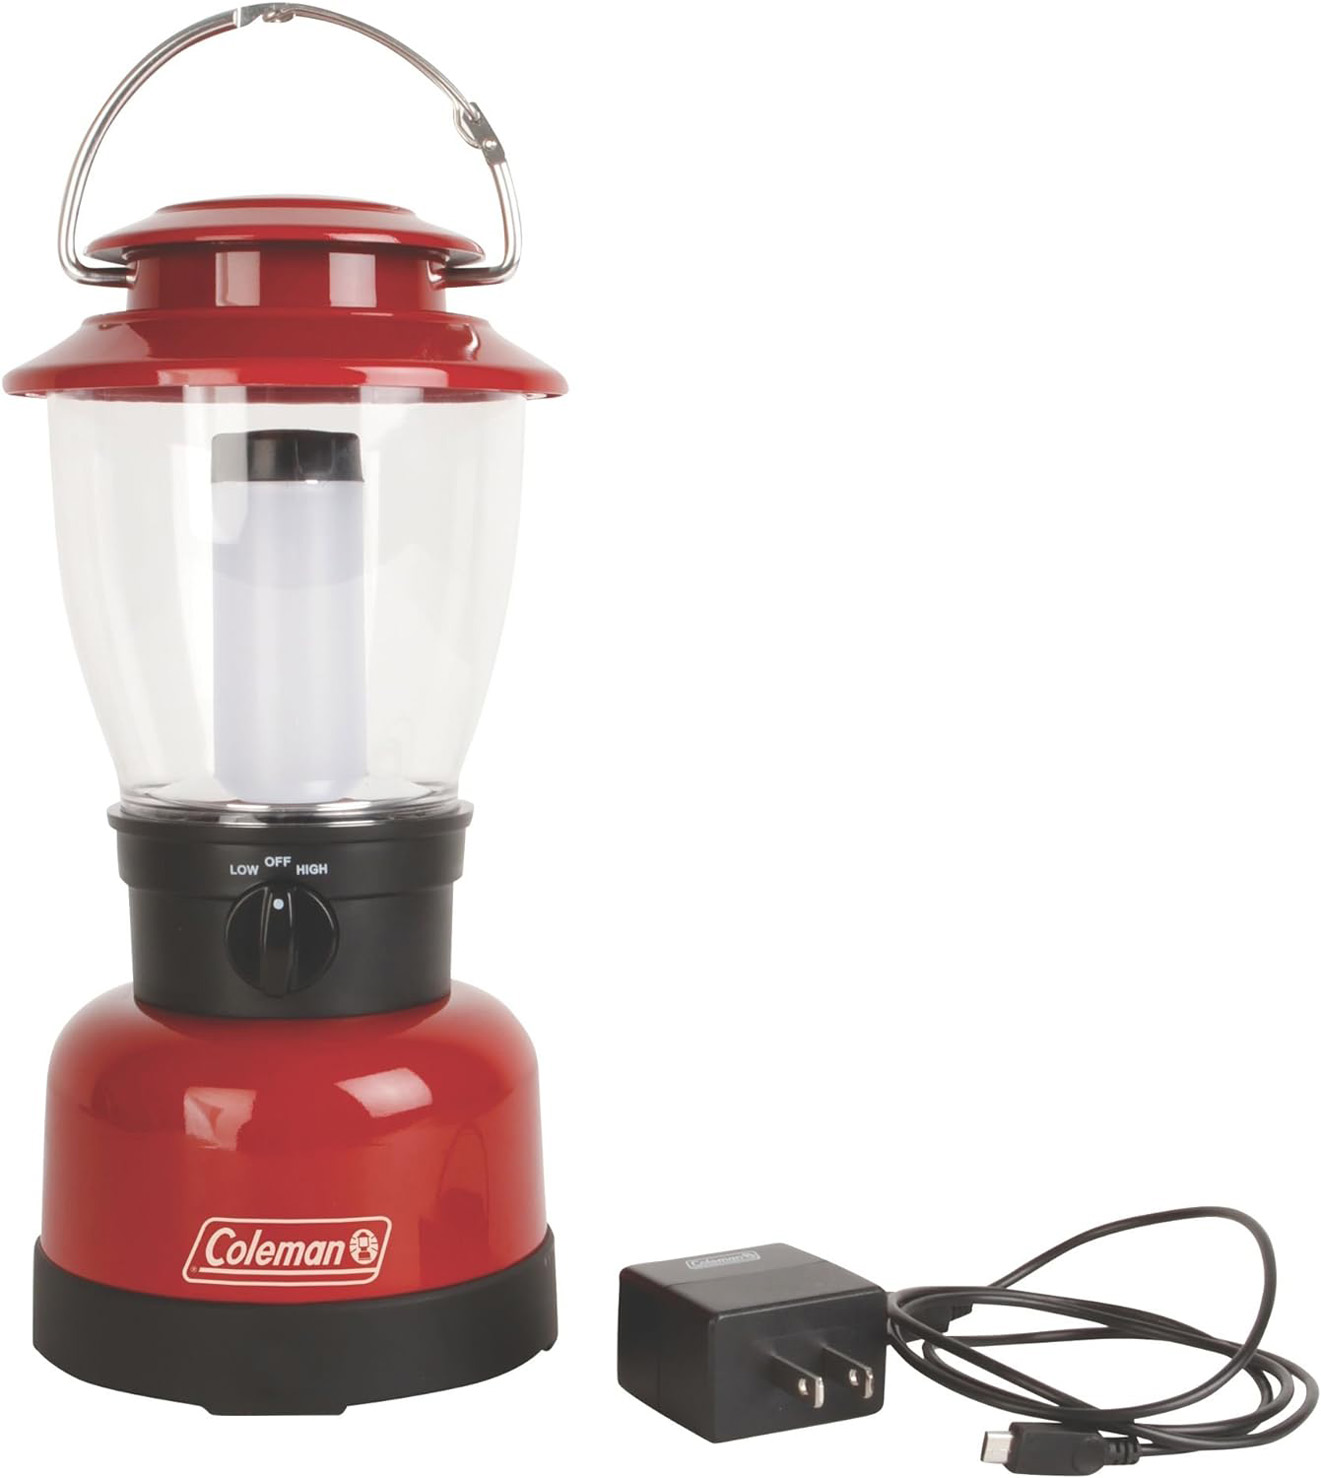 Coleman Classic Rechargeable 400 Lumens LED Lantern, Water-Resistant Lantern with USB Charging Port and Carry Handle